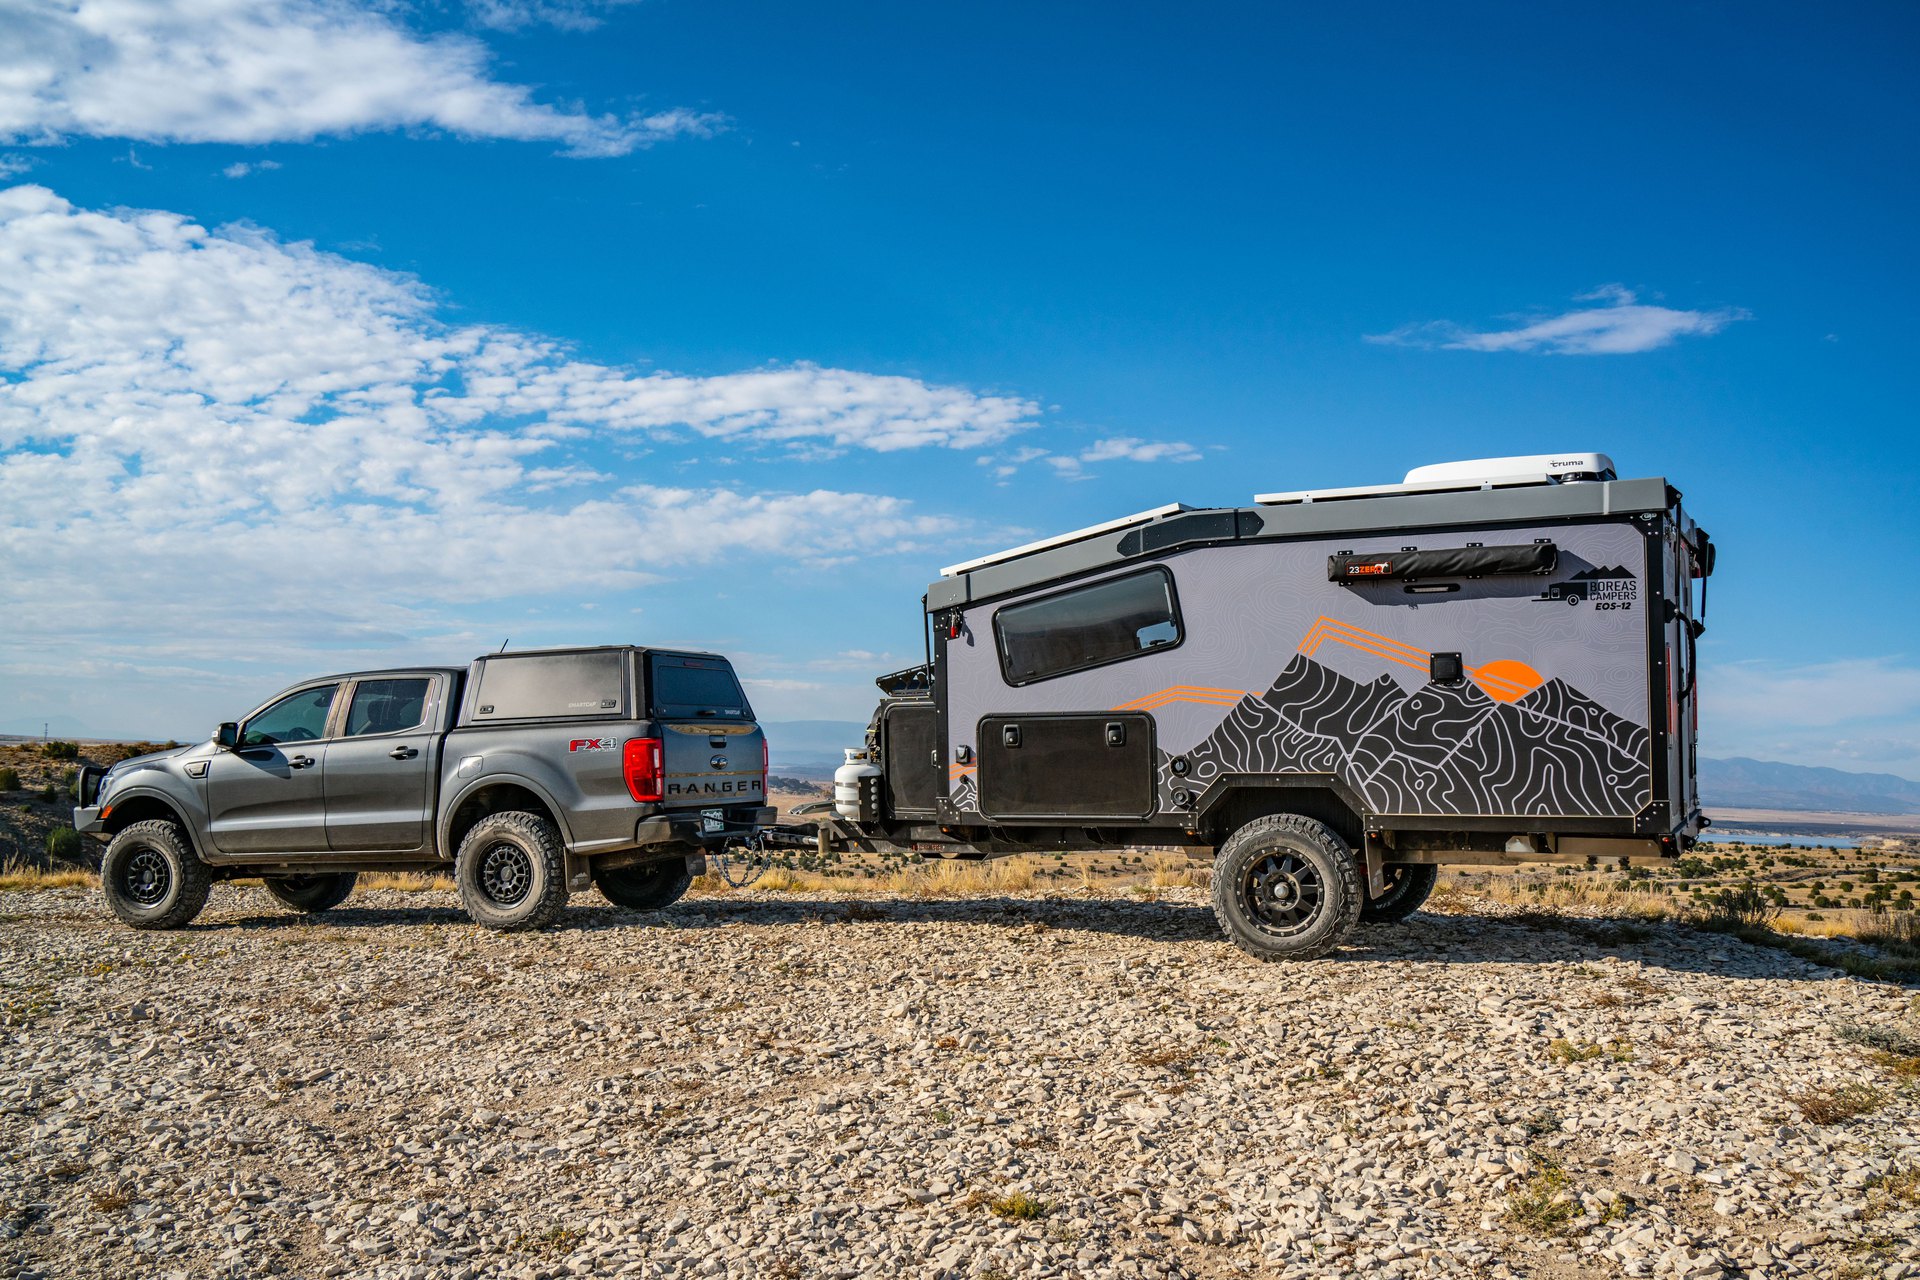 The perfect size RV - on or off the grid